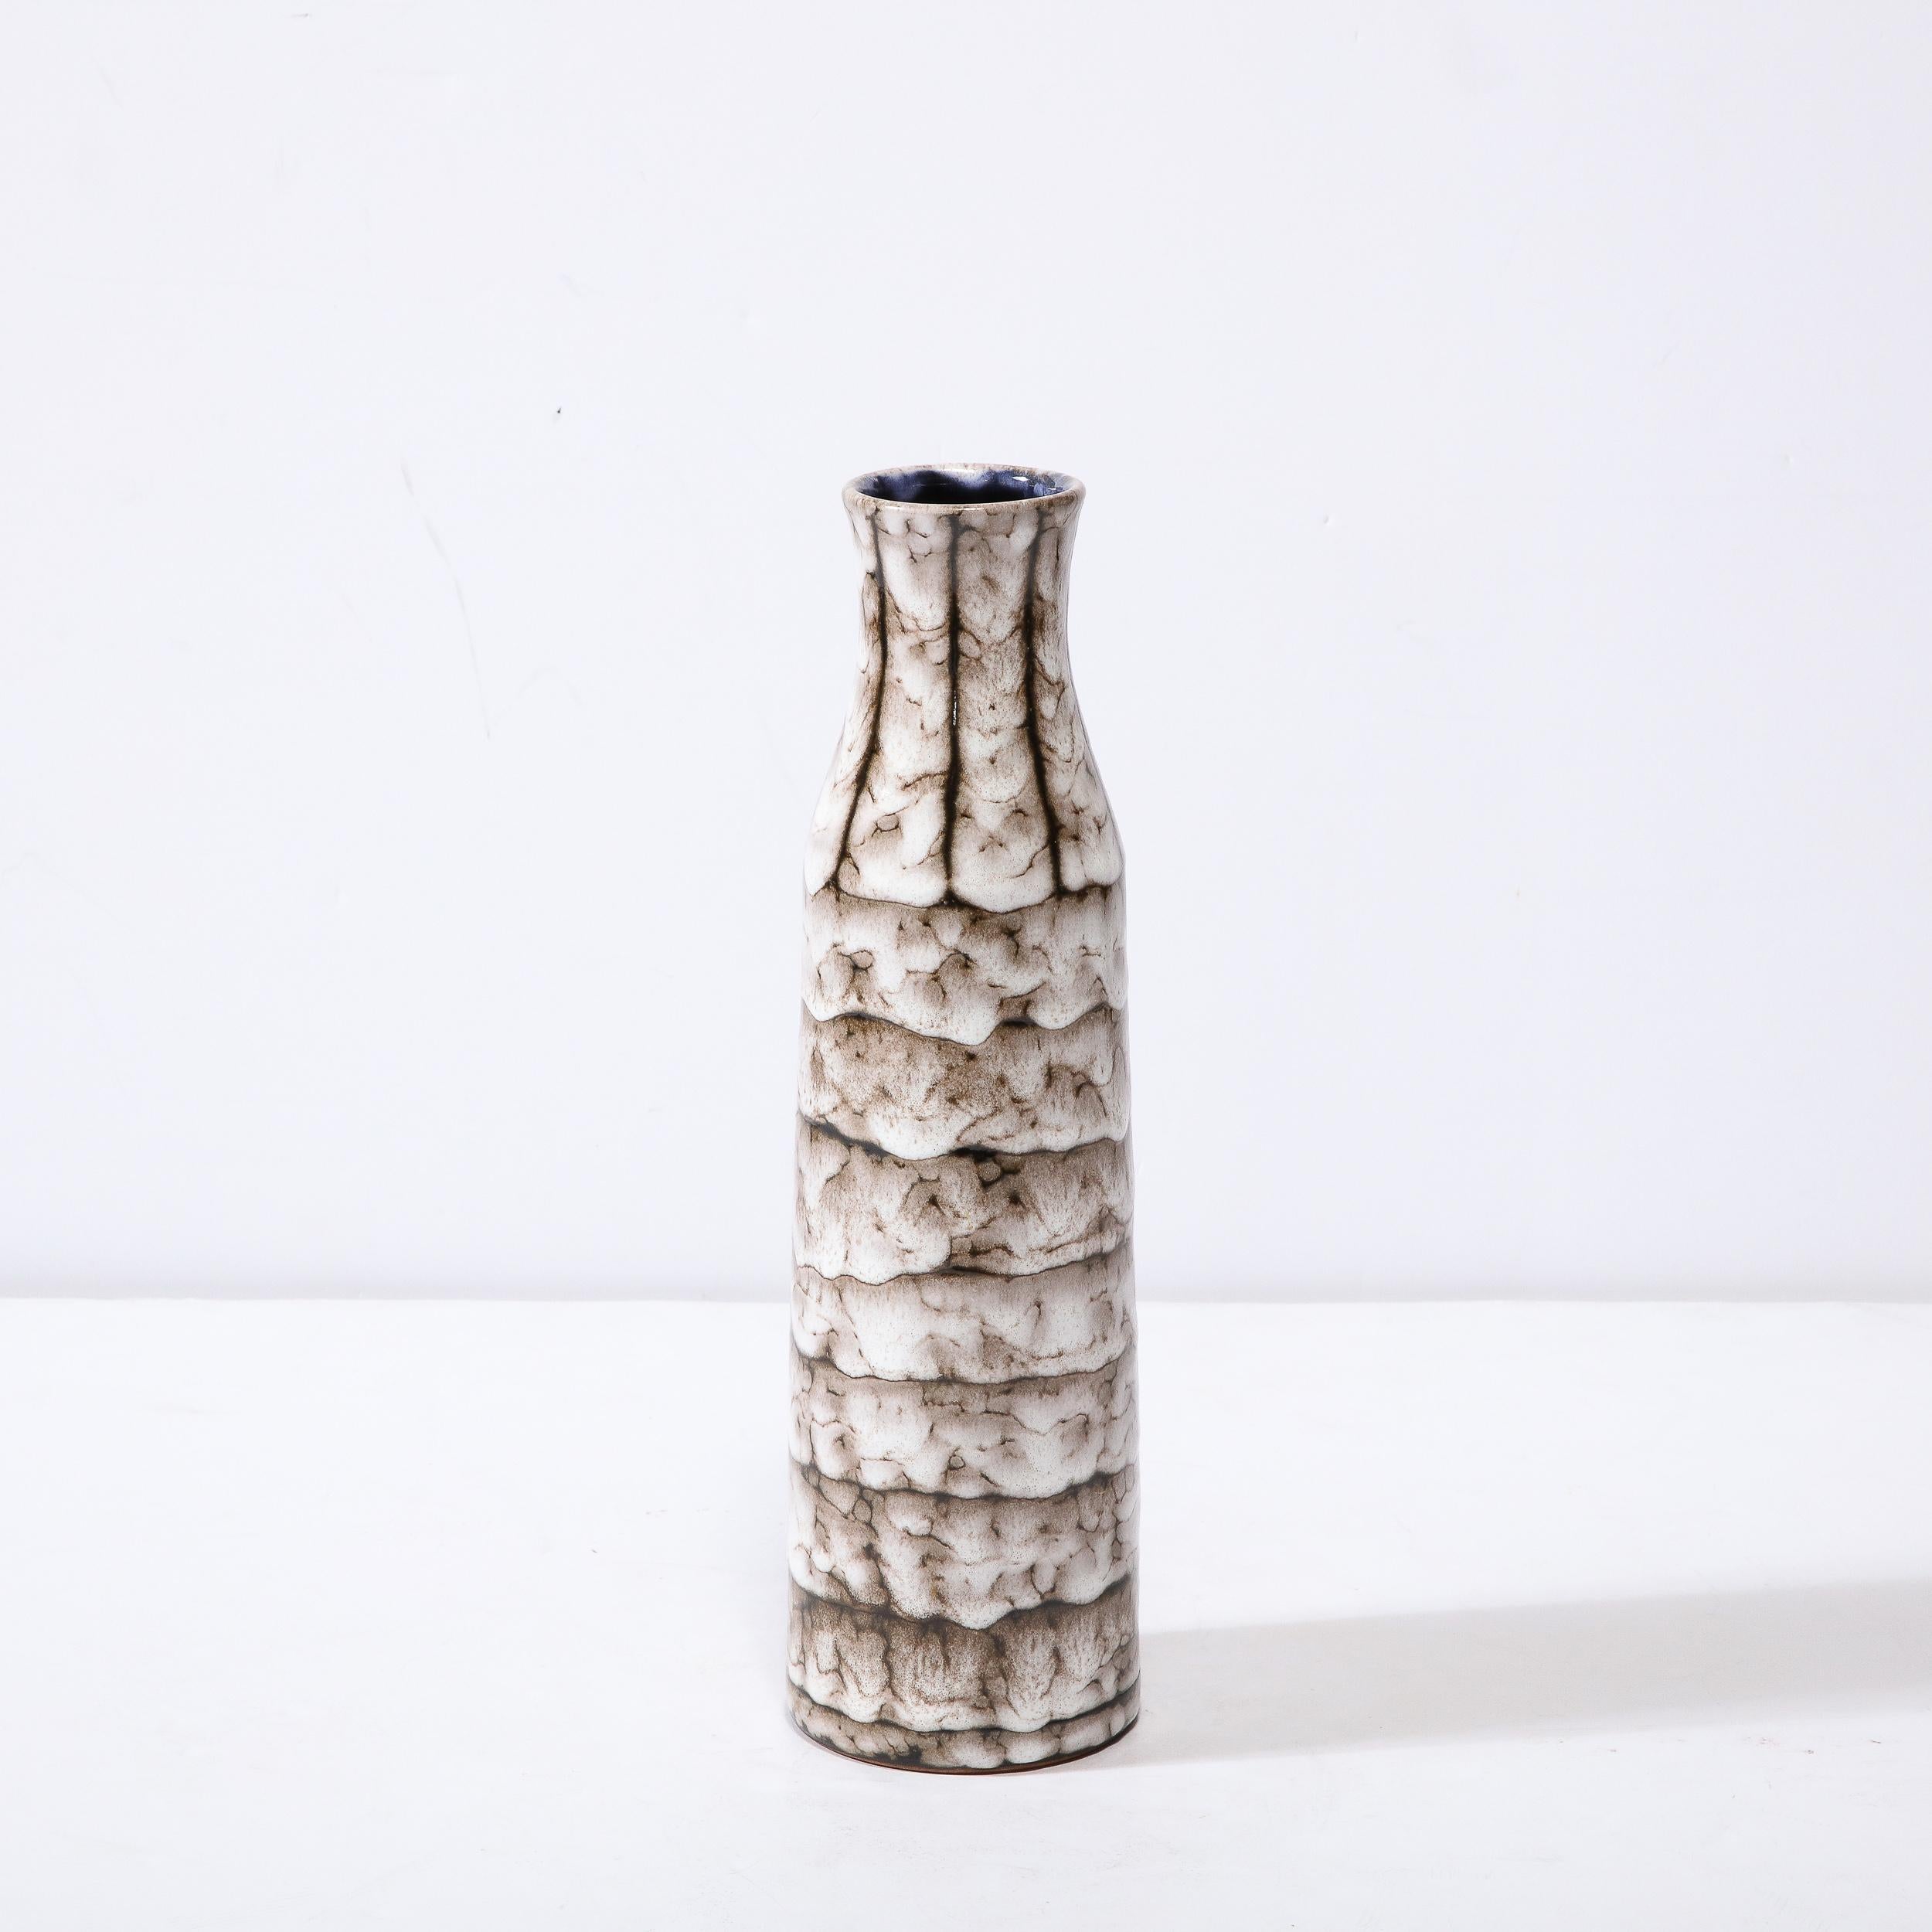 This Mid-Century Modernist Ceramic Vase With Banded Detailing is a beautiful example of Post War European Ceramics, realized in Hódmezovasarhely Majolikagyár, Hungary Circa 1960. With a Stunning textural finish composed in Cream White and Blackened